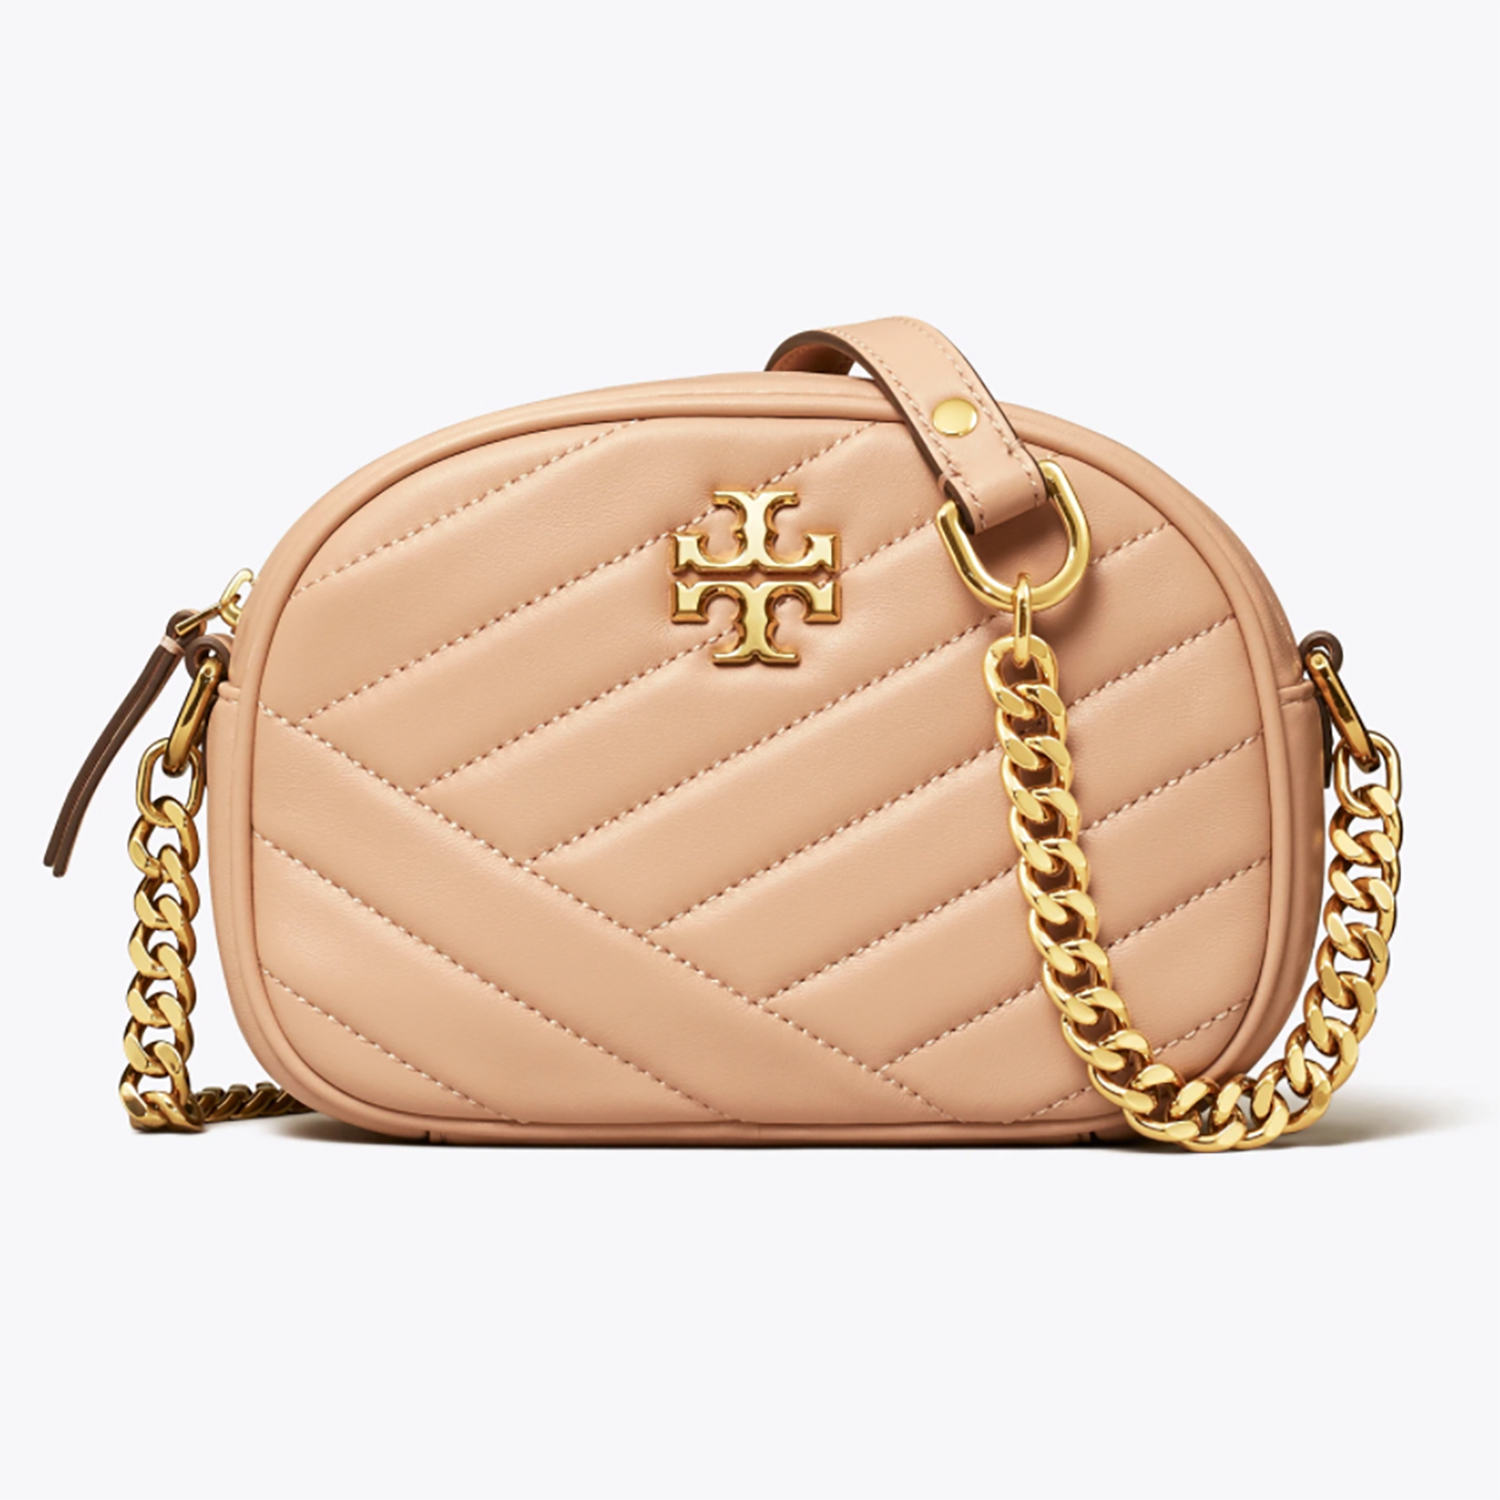 Tory Burch Quietly Launched Its Cyber Monday Sale With Its Most Famous